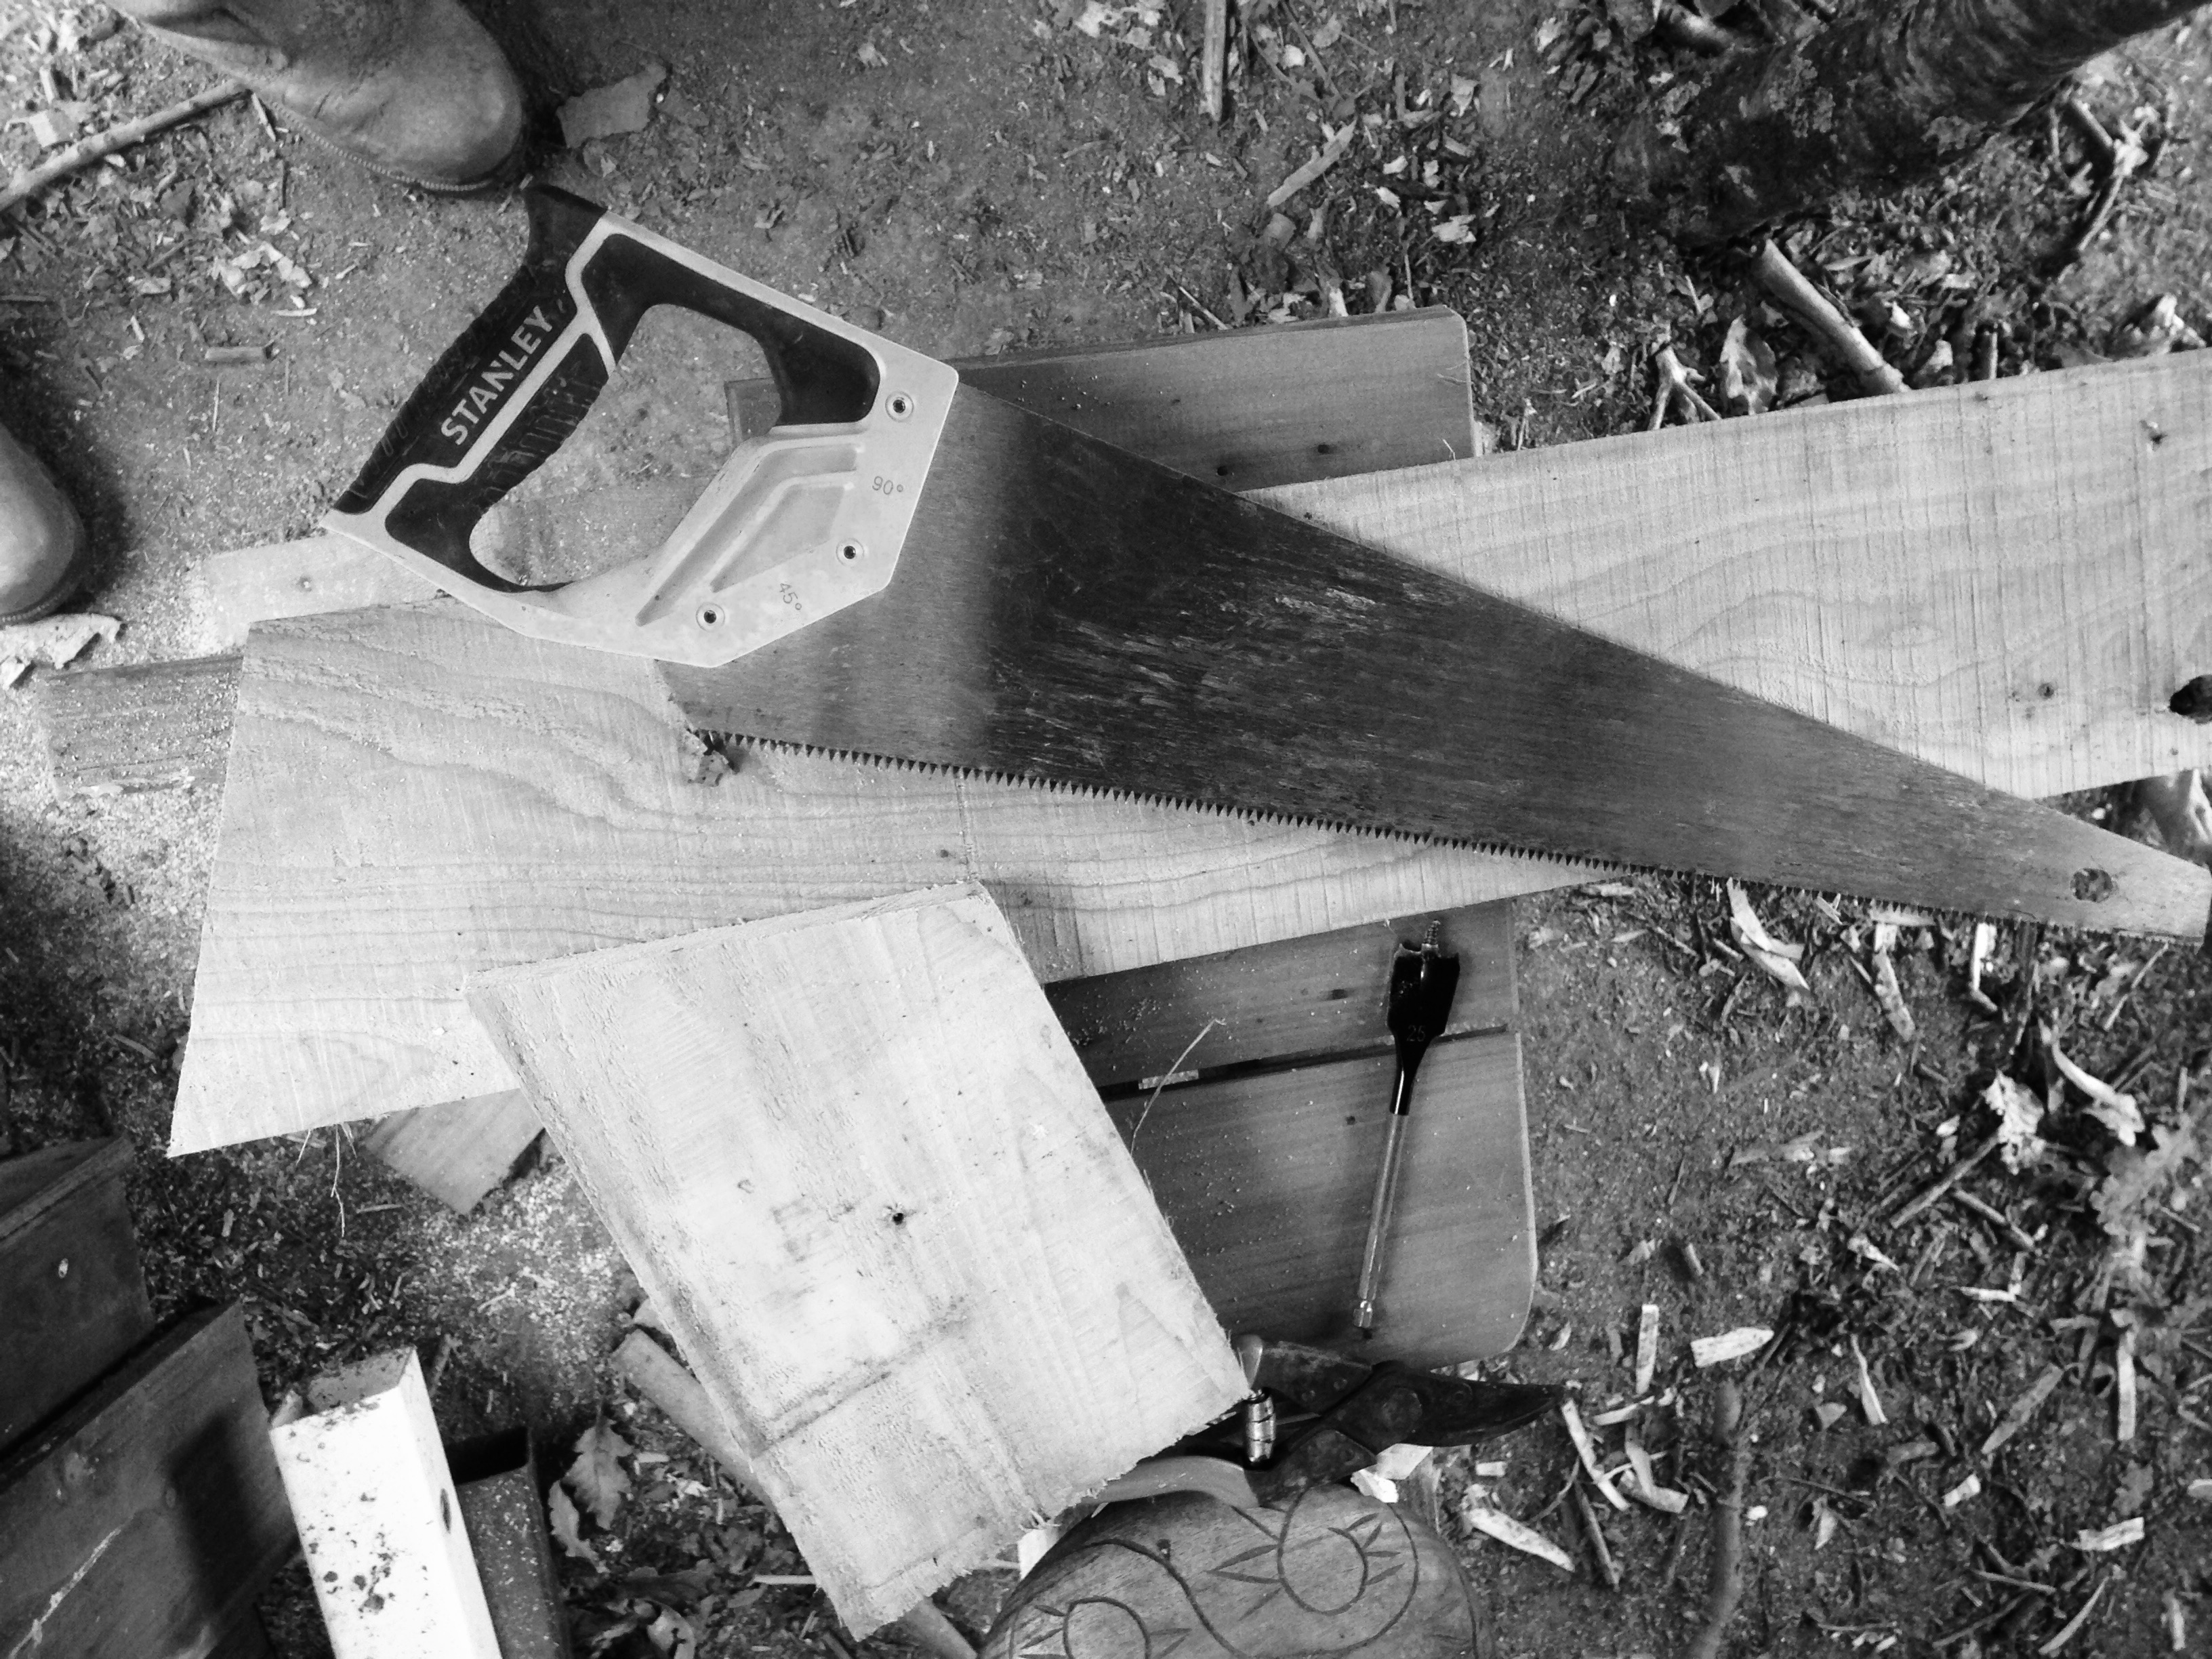 Saw and wood in black and white